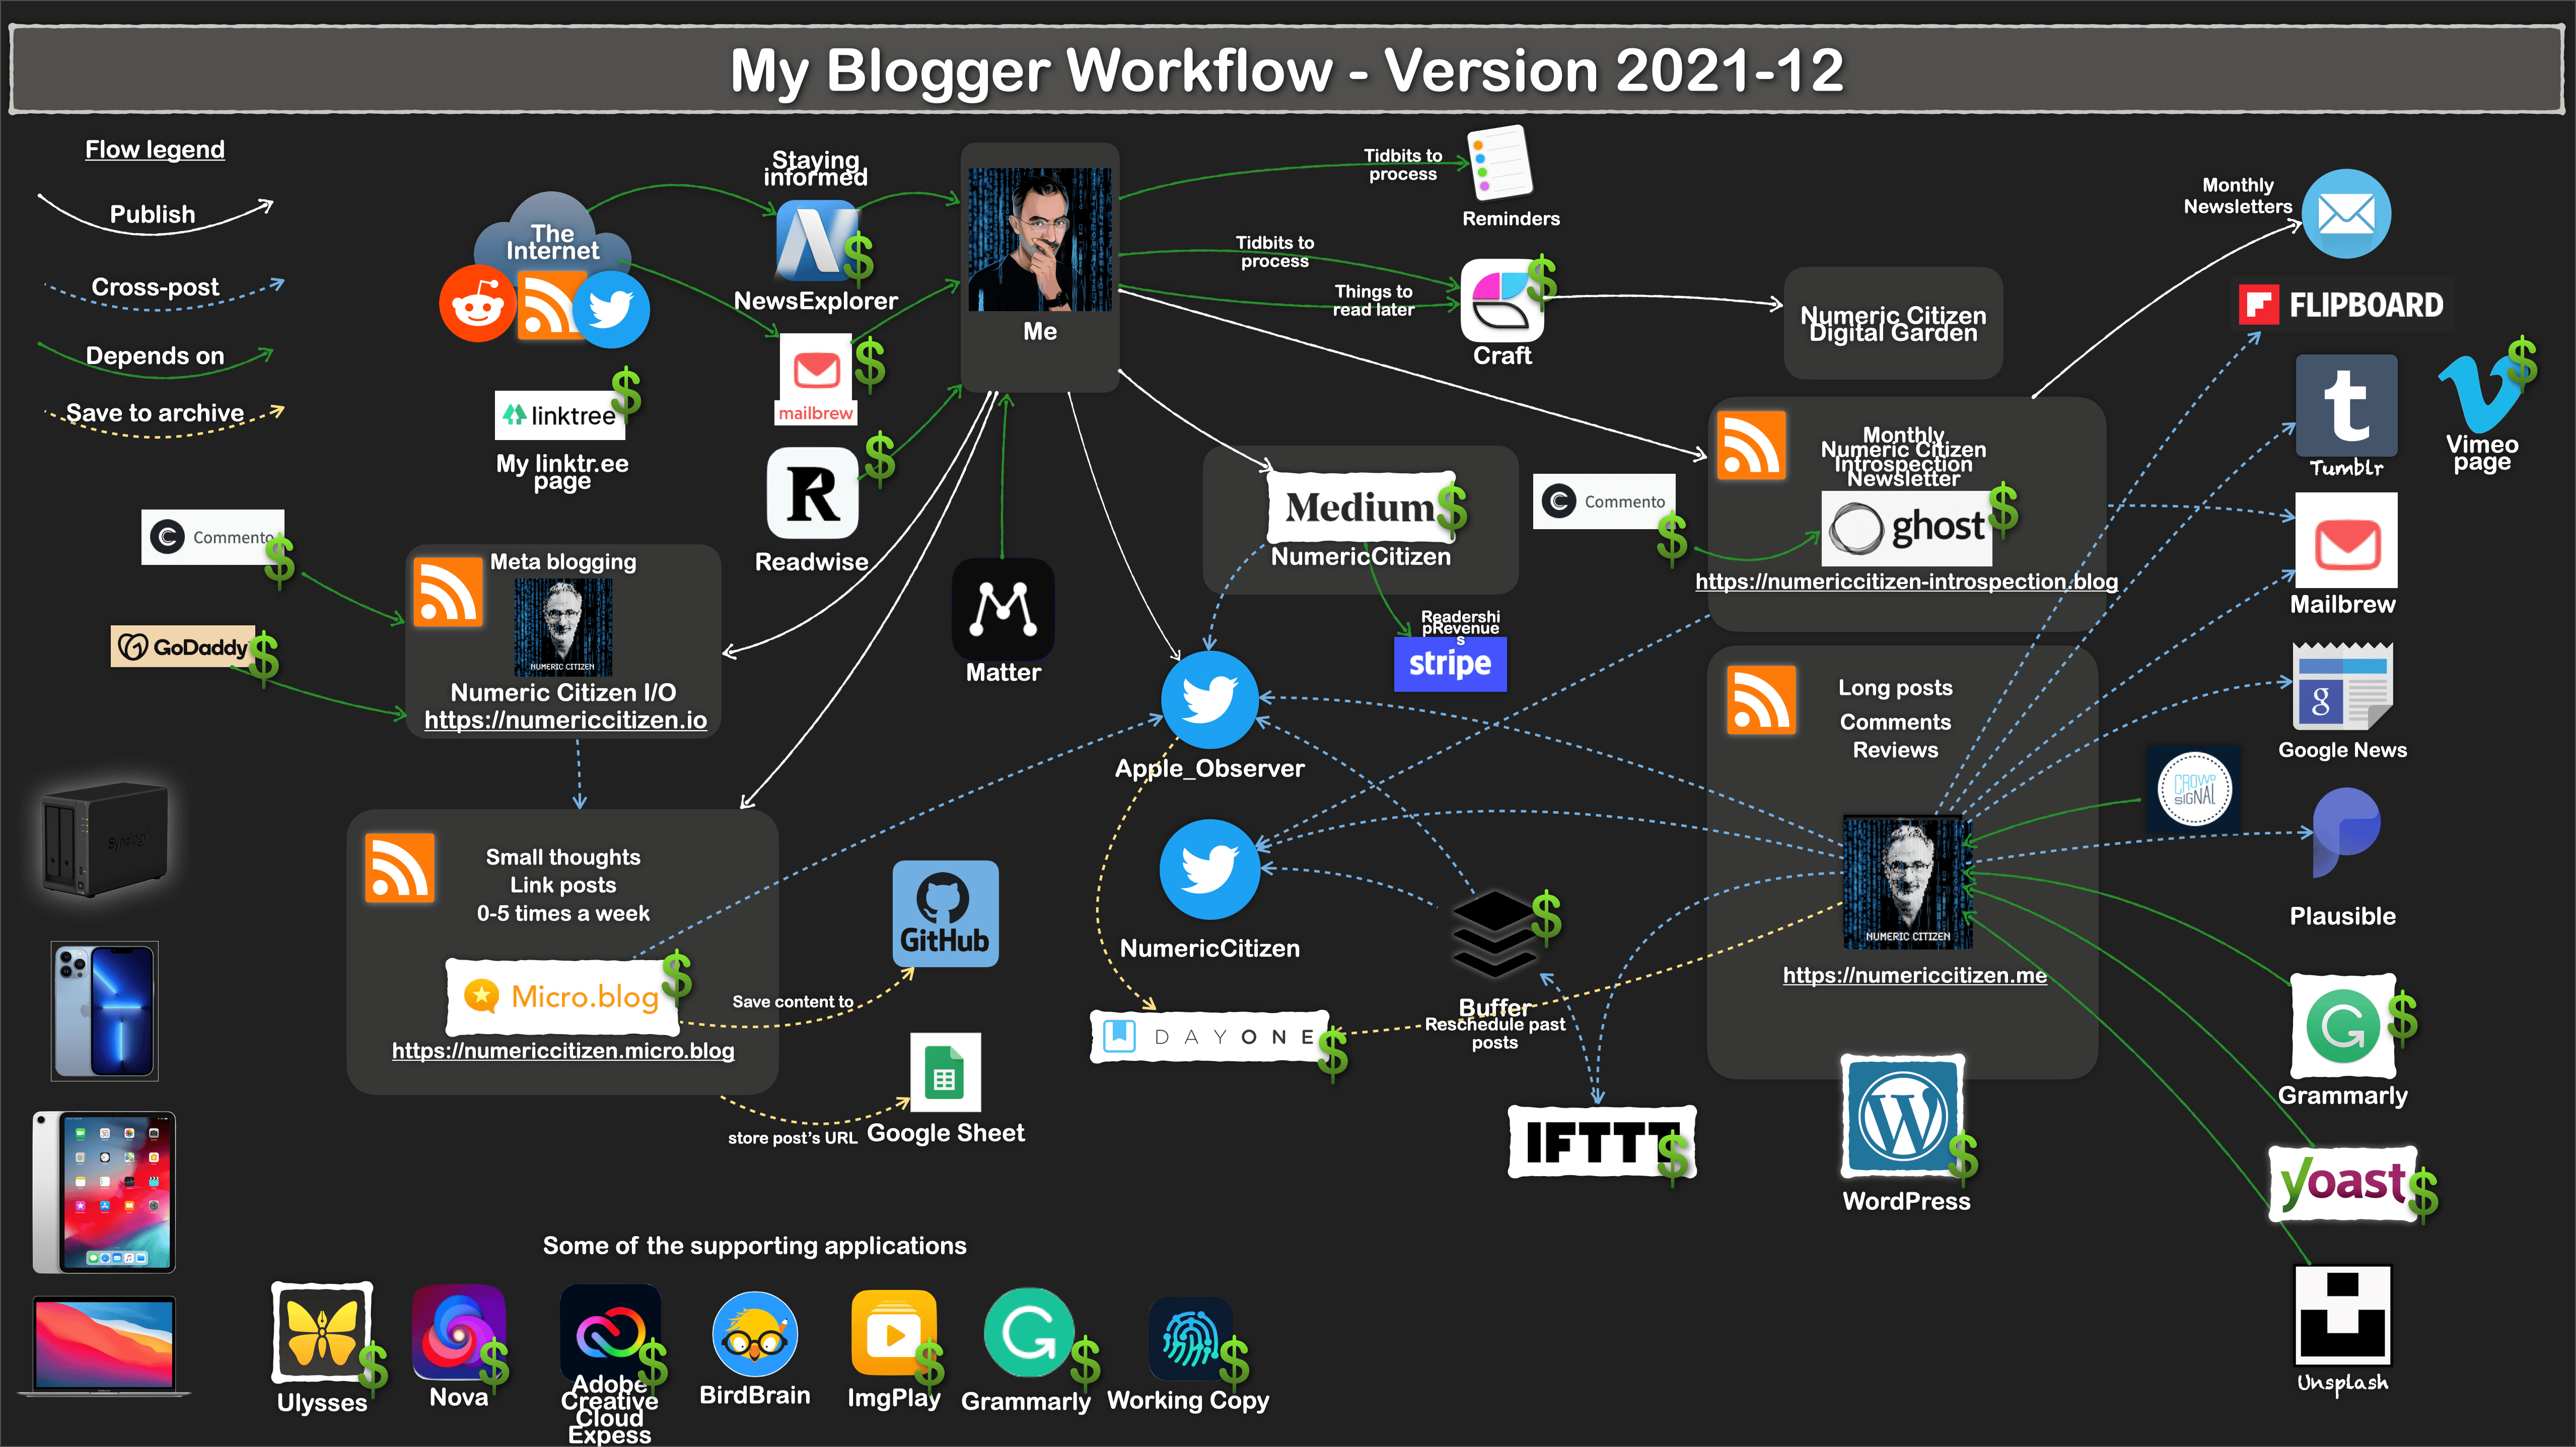 My blogger workflow as of 2021-12.